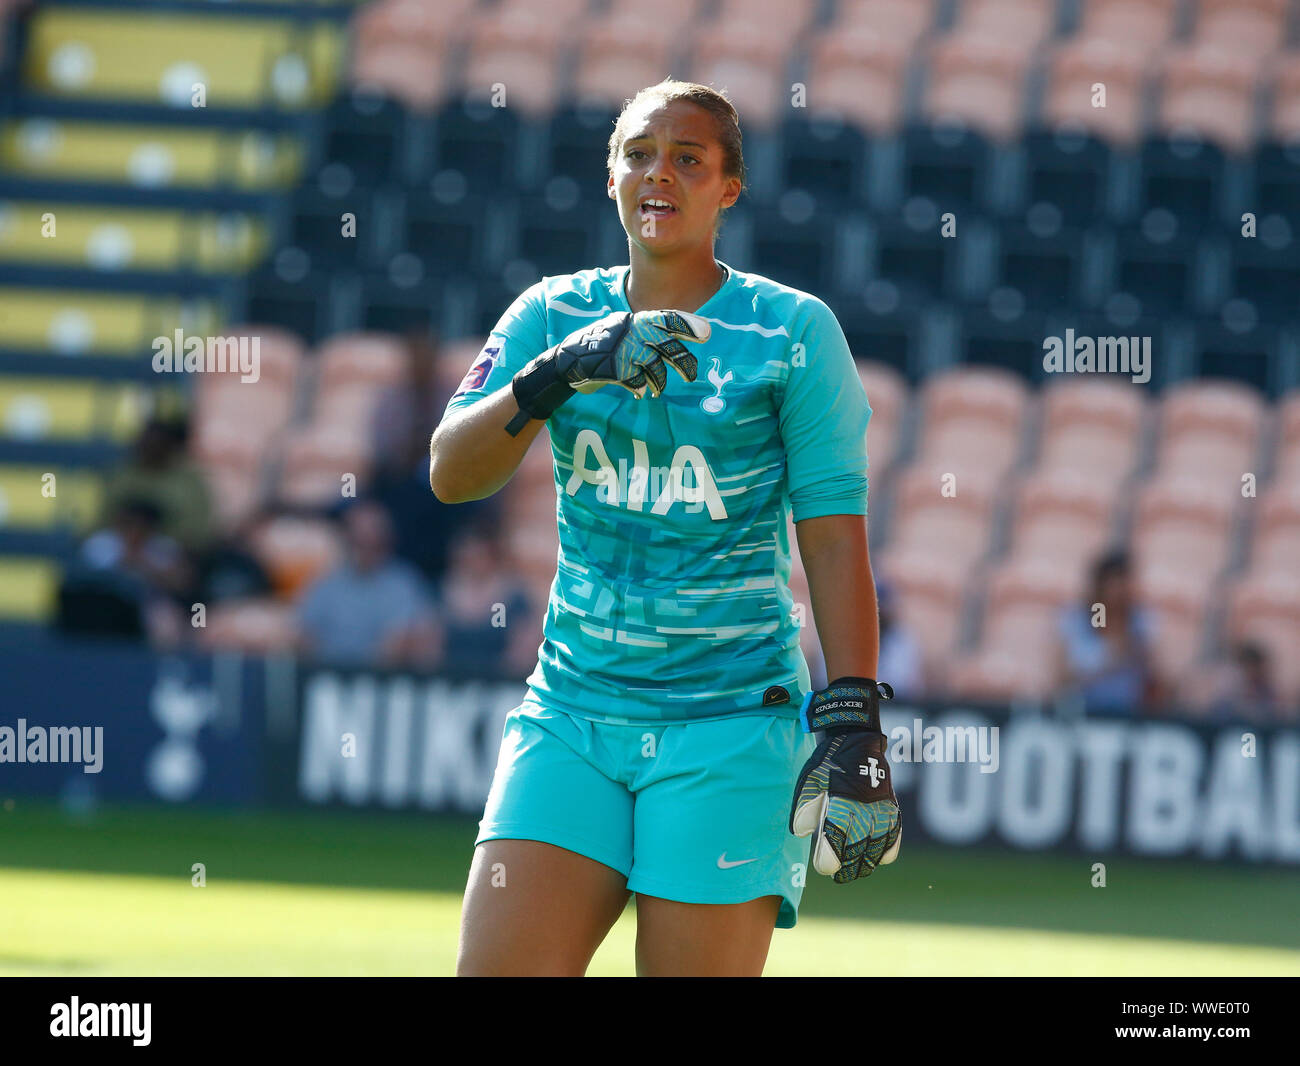 London, Inited Kingdom. 15th Sep, 2019. LONDON, UNITED KINGDOM SEPTEMBER 15. Becky Spencer of Tottenham Hotspur Ladies during Barclays FA Women's Spur League between Tottenham Hotspur and Liverpool at The Hive Stadium, London, UK on 15 September 2019 Credit: Action Foto Sport/Alamy Live News Stock Photo